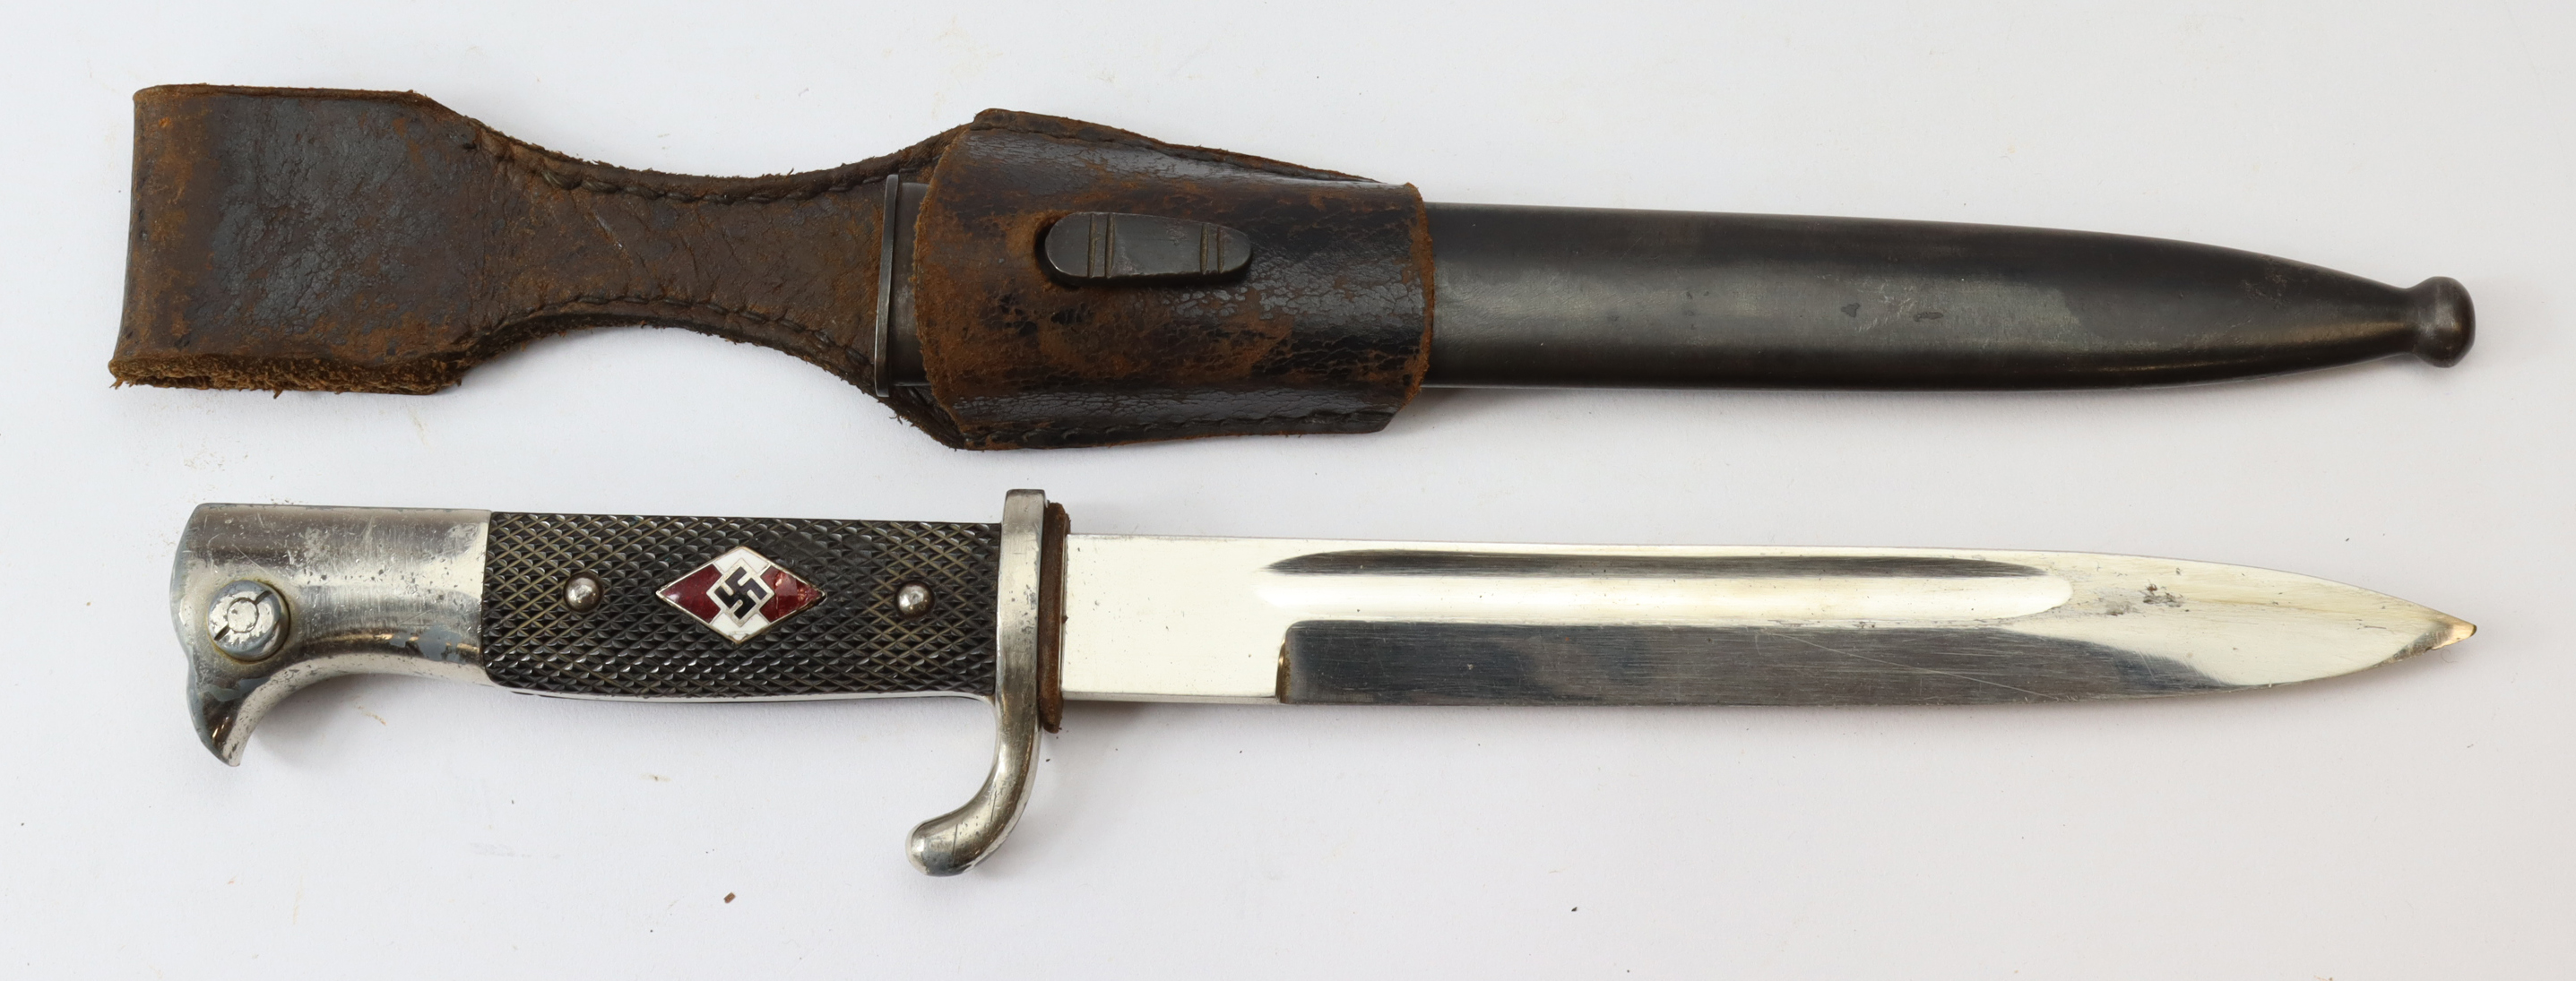 German Bayonet HJ diamond to grip, high finish dress blade, complete with scabbard & frog